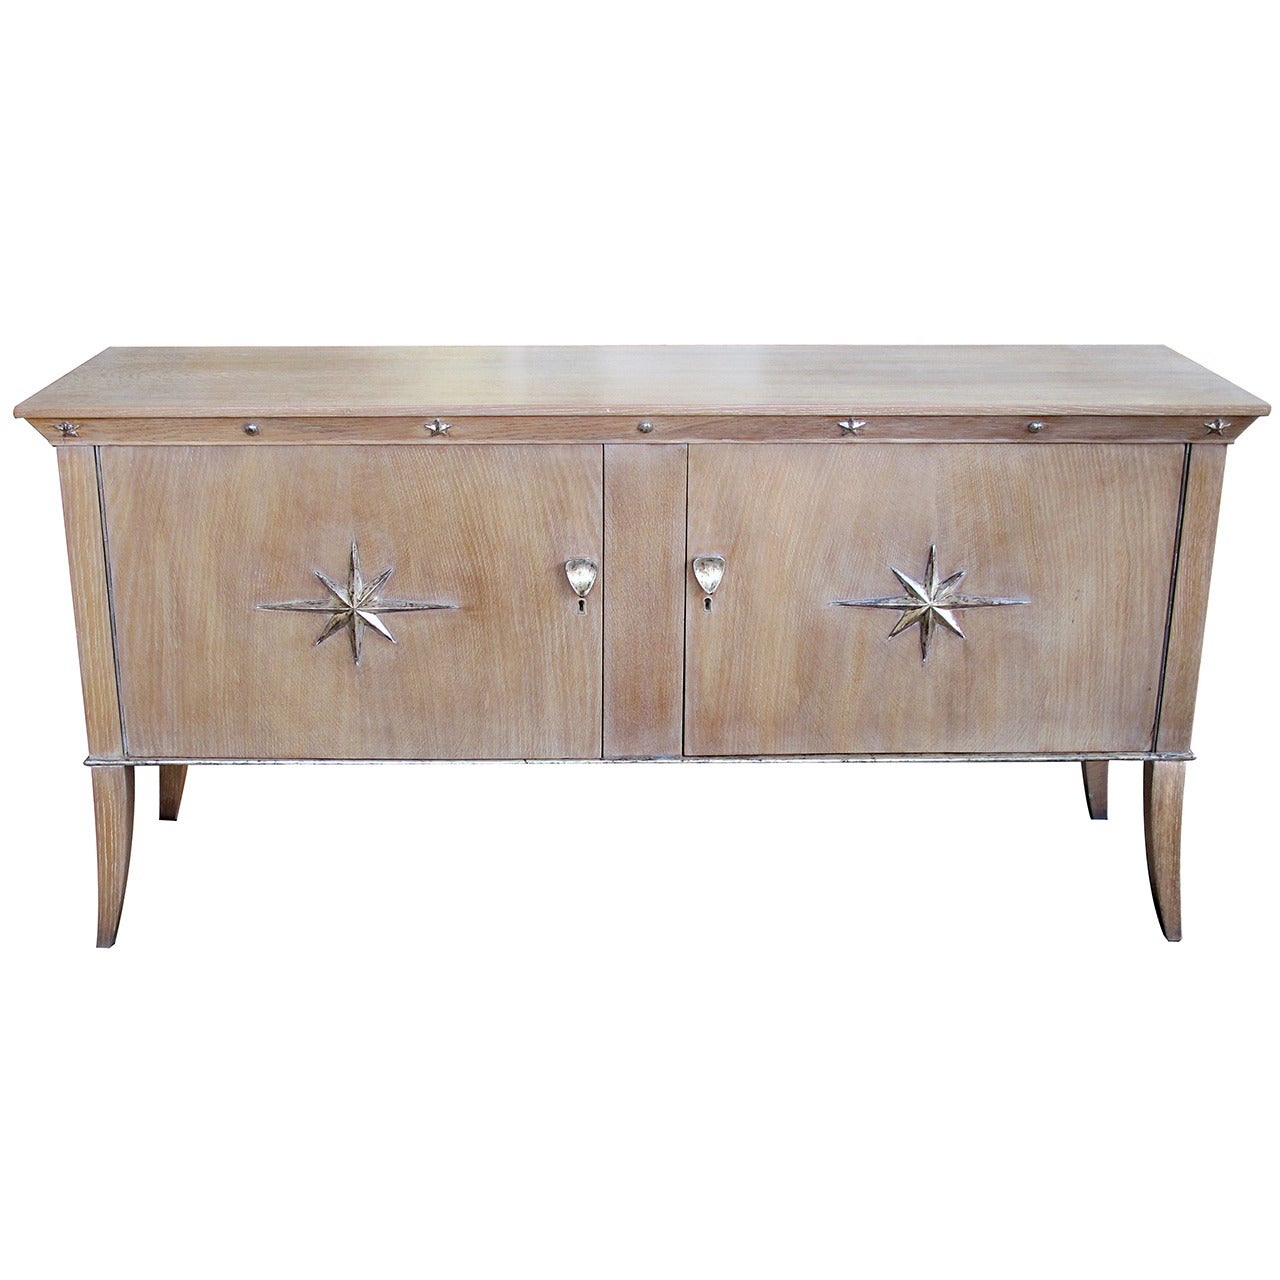 Stylish French Two-Door Cerused Oak Sideboard with Silver Leaf Motifs